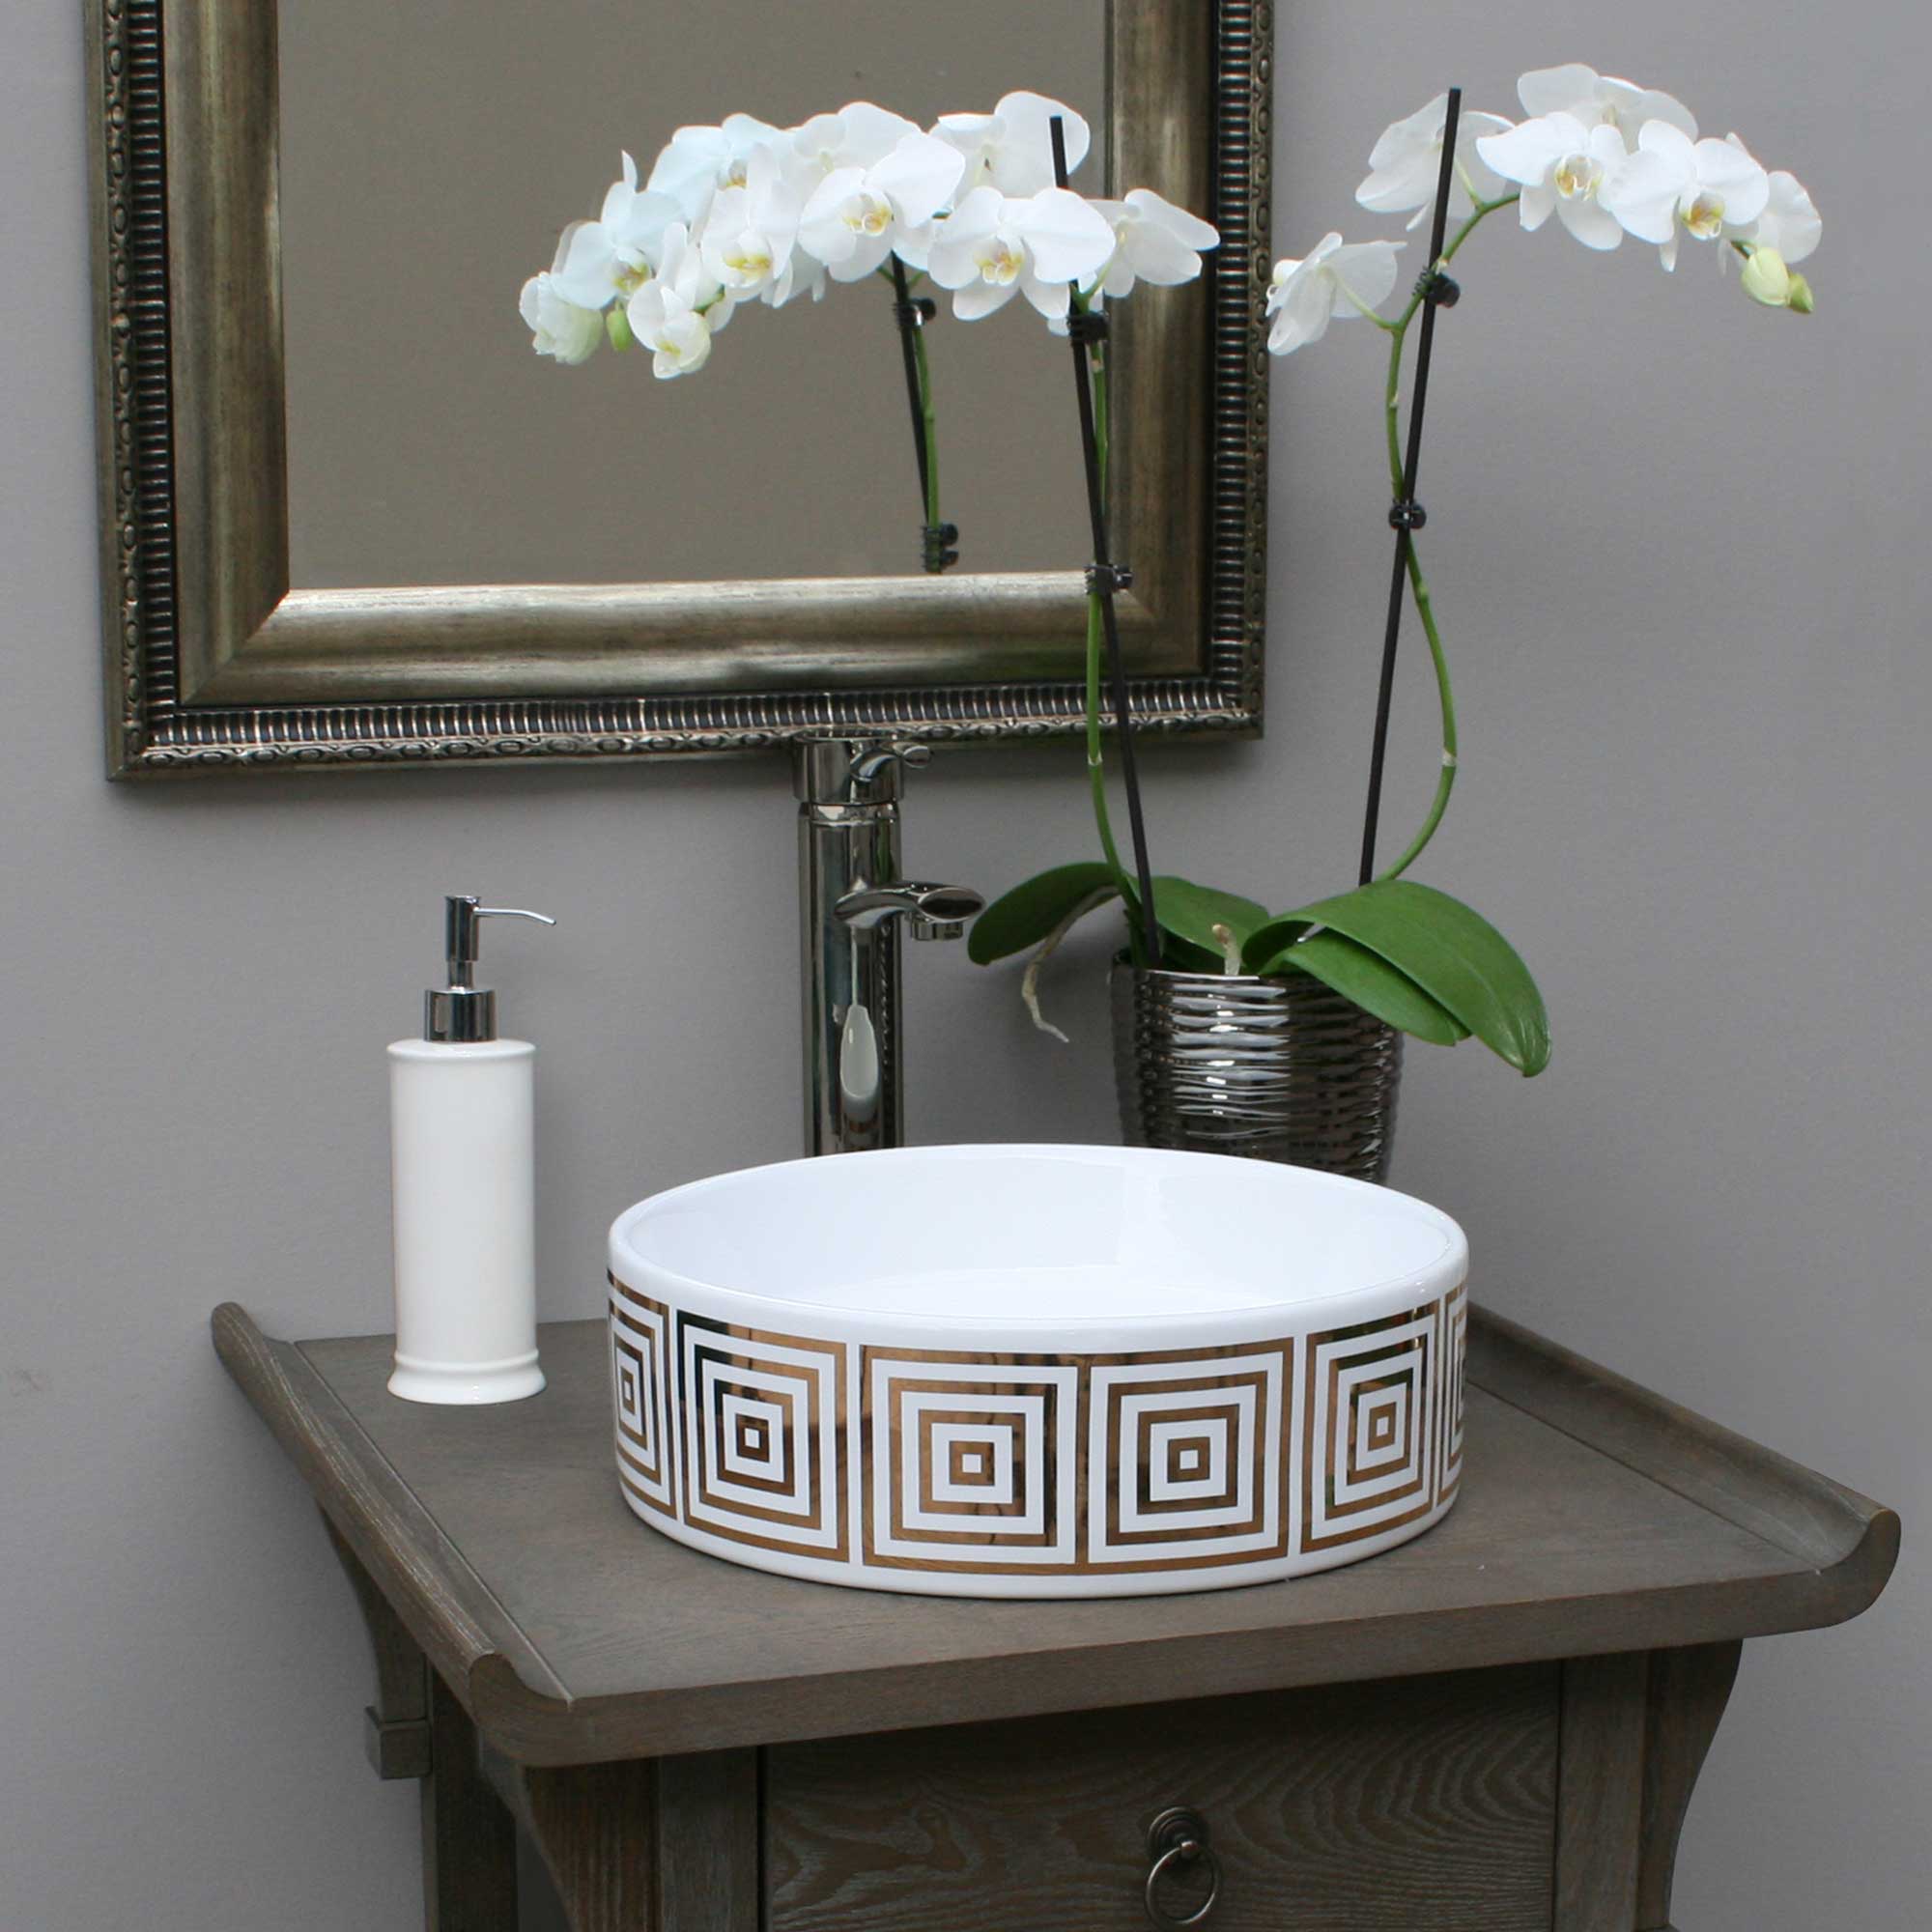 13" vessel sink in gray bathroom painted with big squares design